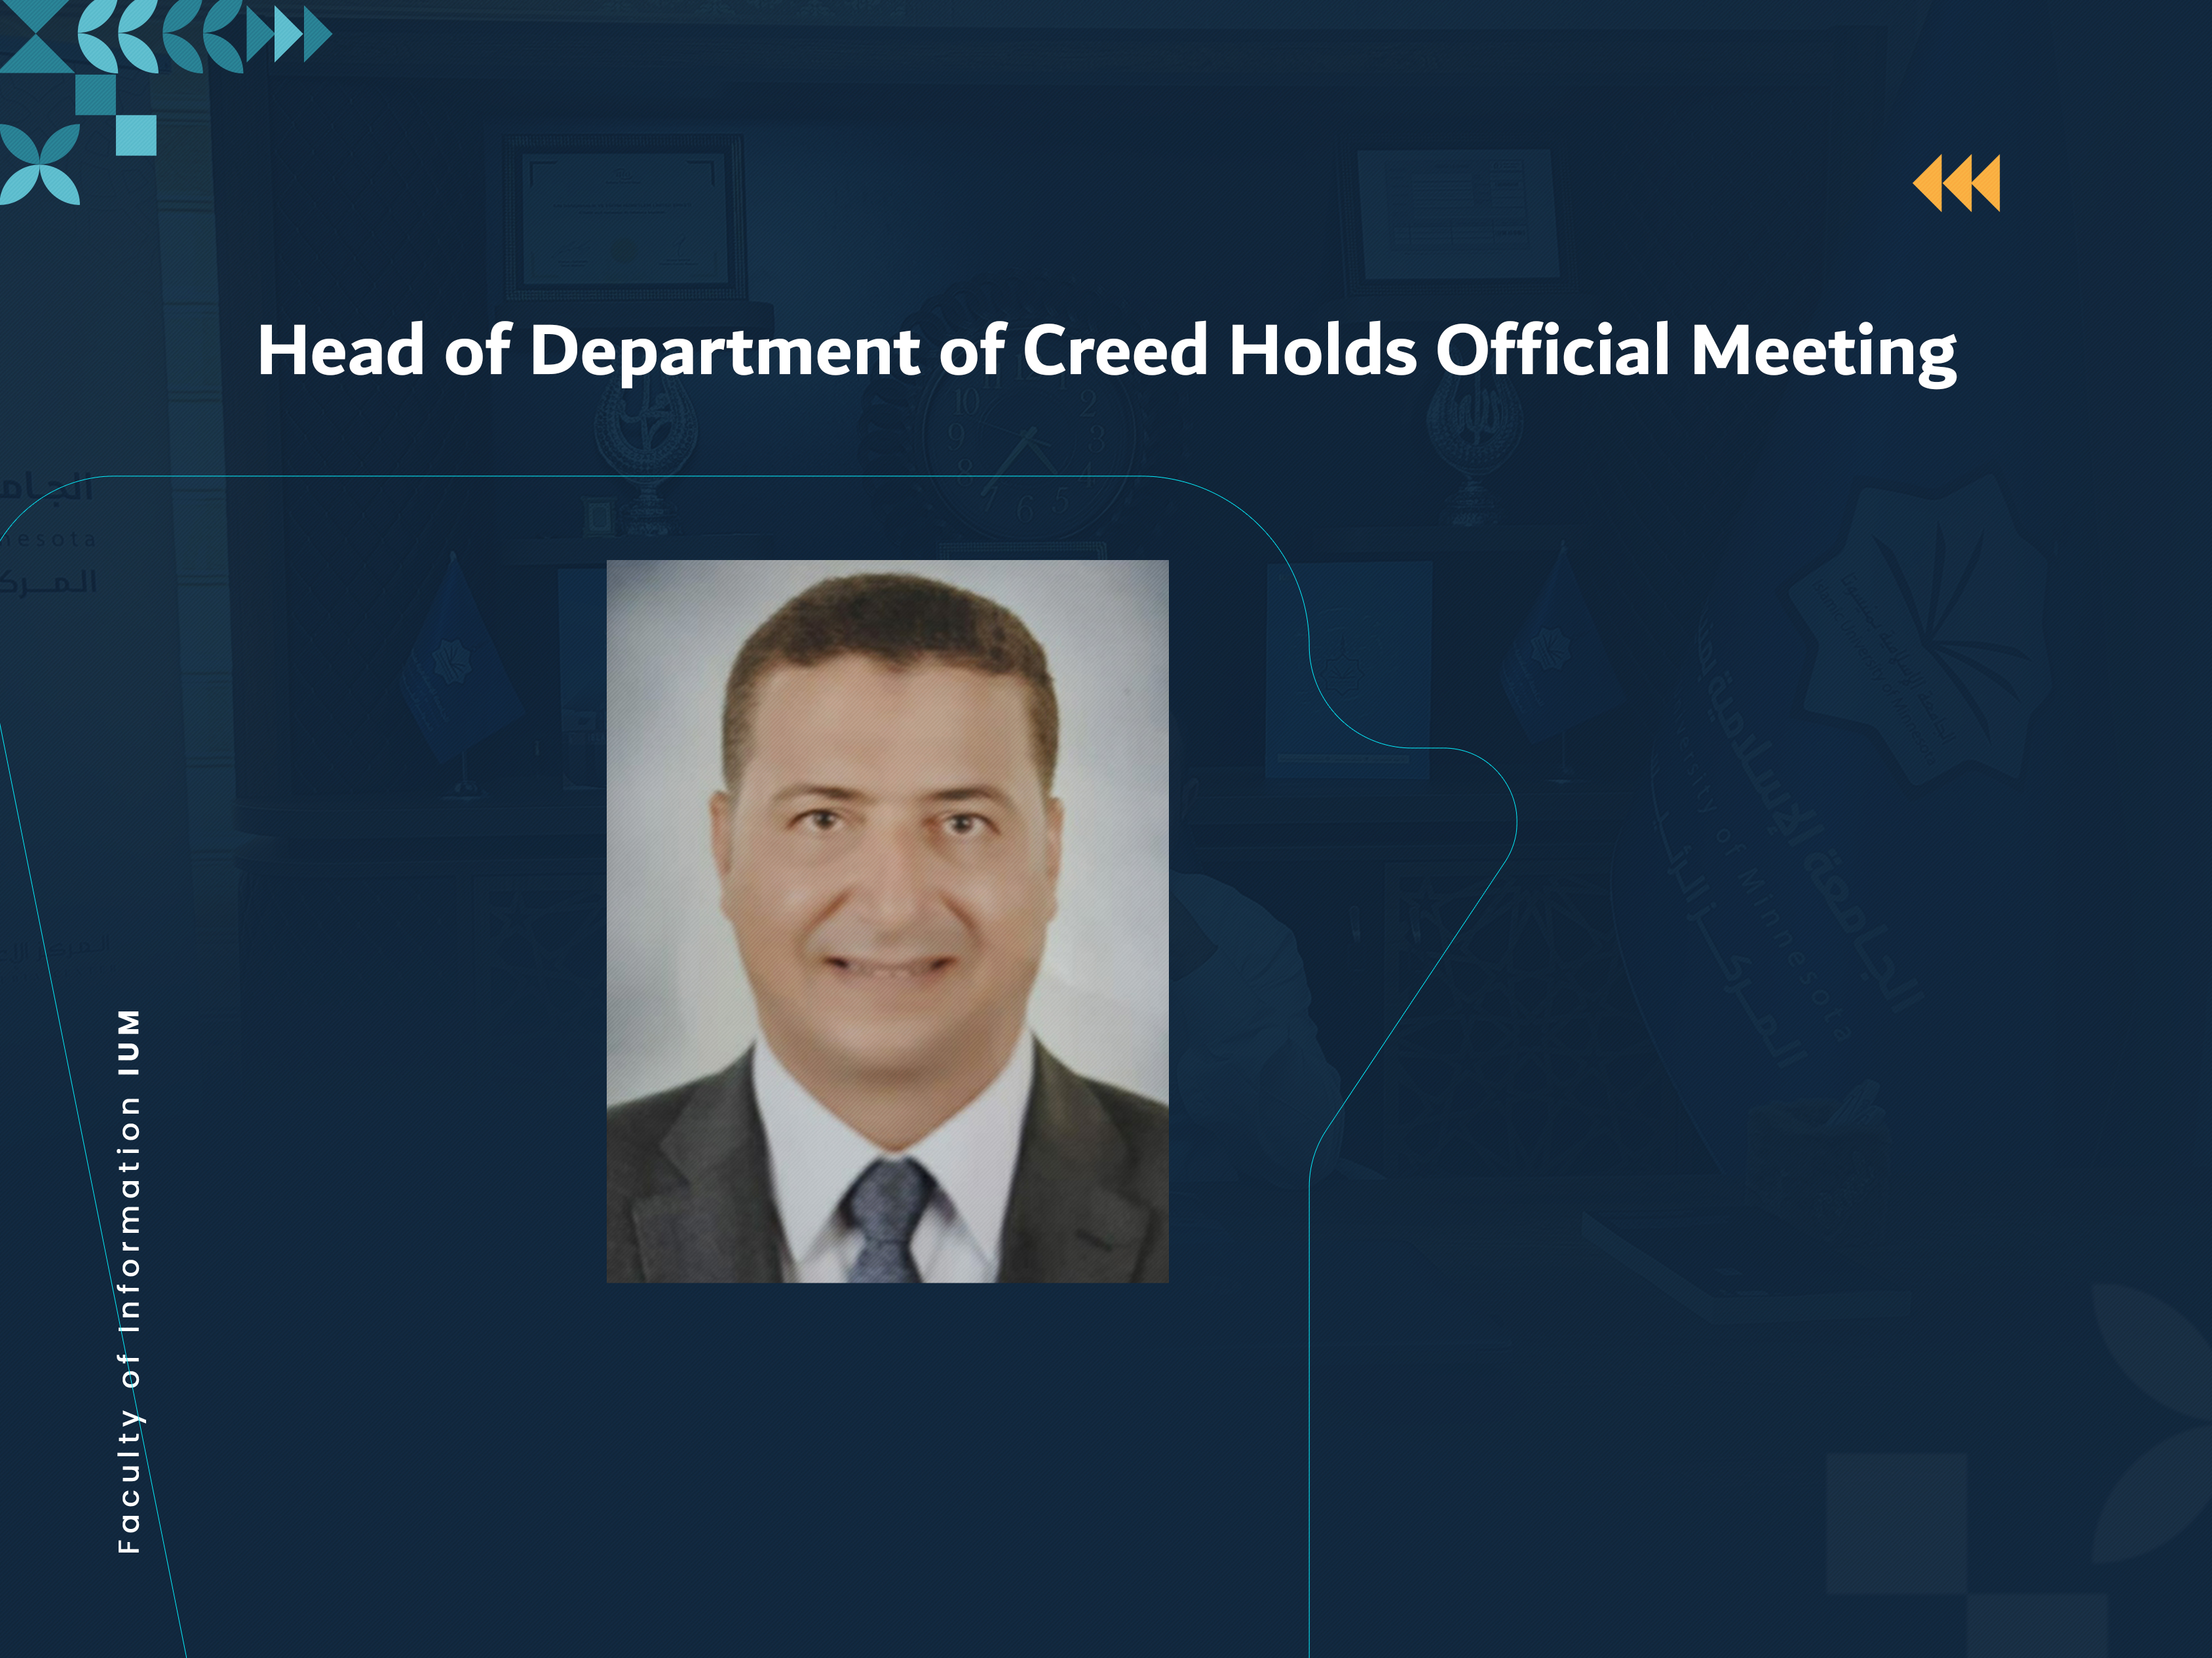 Head of Department of Creed Holds Official Meeting